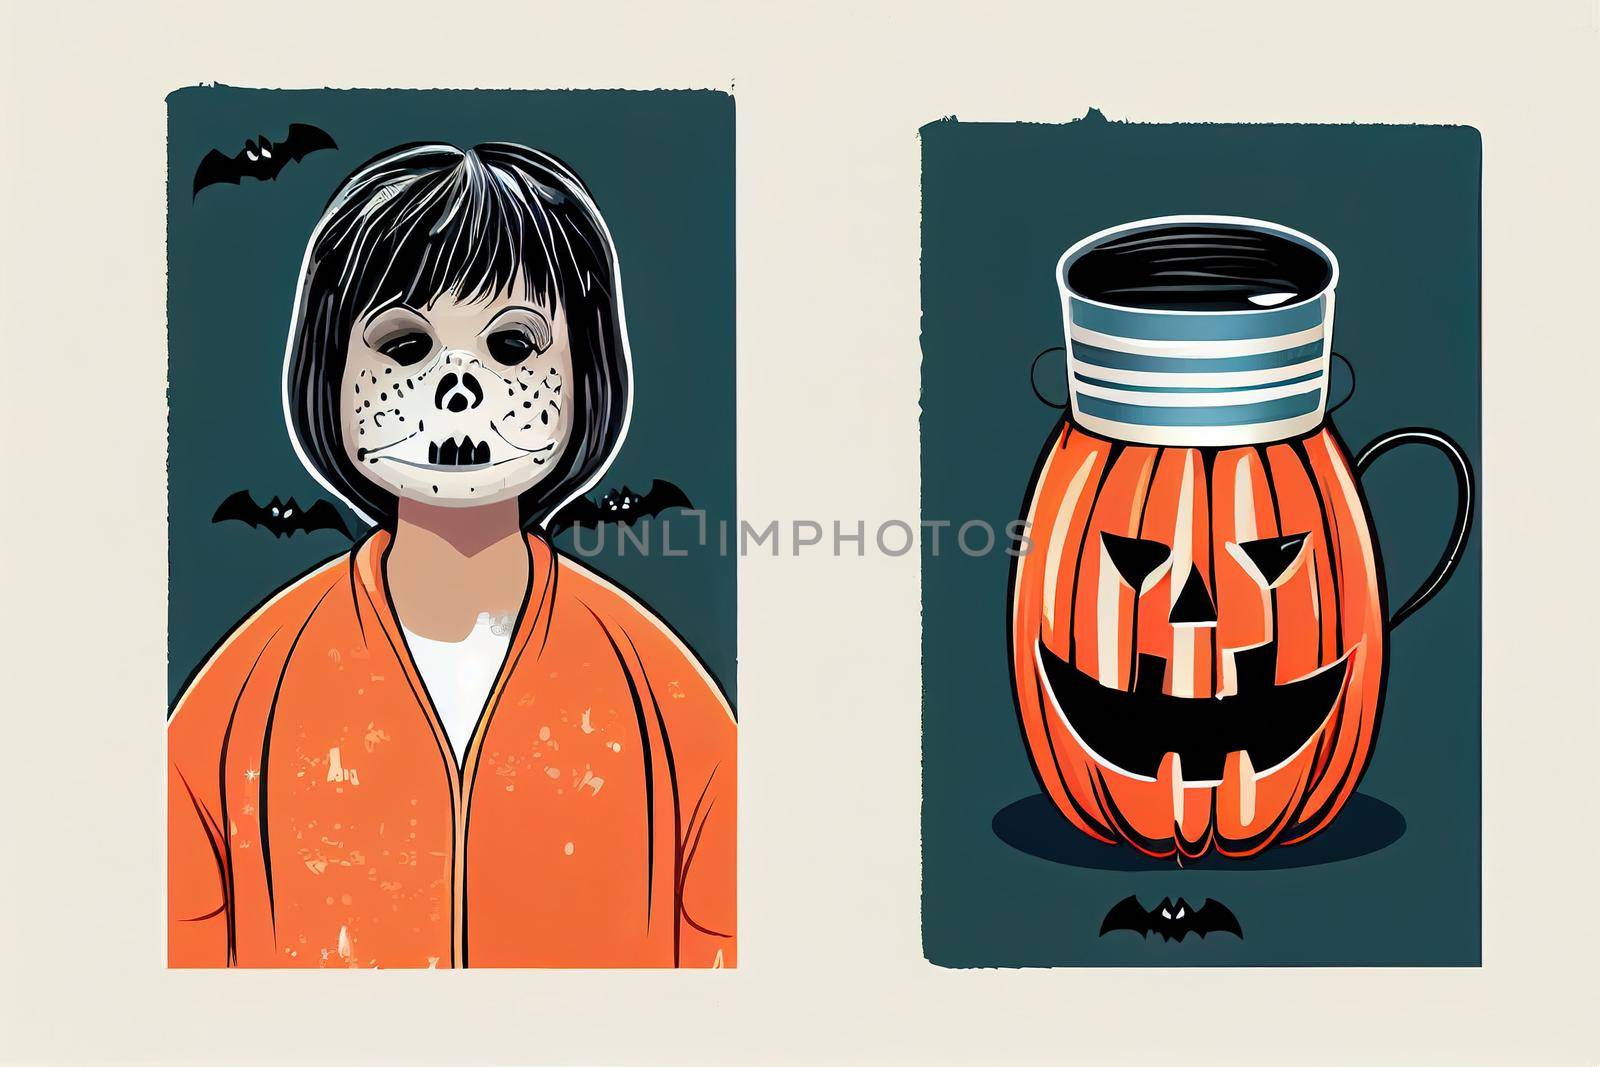 Cute Halloween Illustration, Infantile Style Halloween Party Print with Funny Mummy on a Police Mug Shot Background Ideal for Card, Wall Art, Poster, , Hand drawn v1